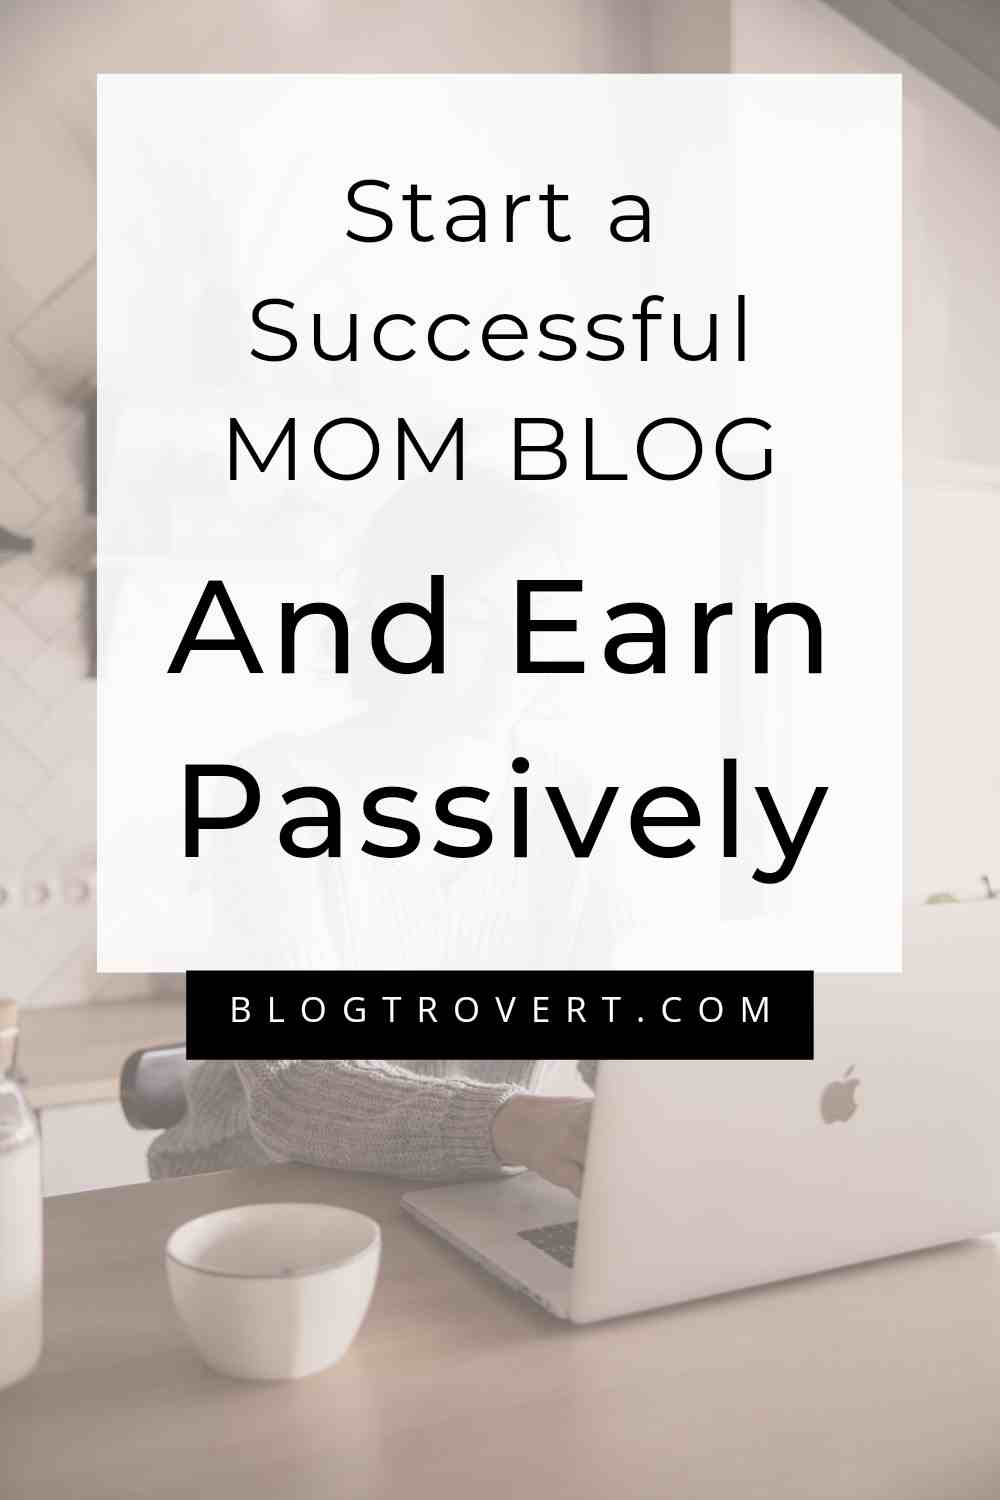 How to start a mom blog in [year] - Ultimate guide and success tips 2